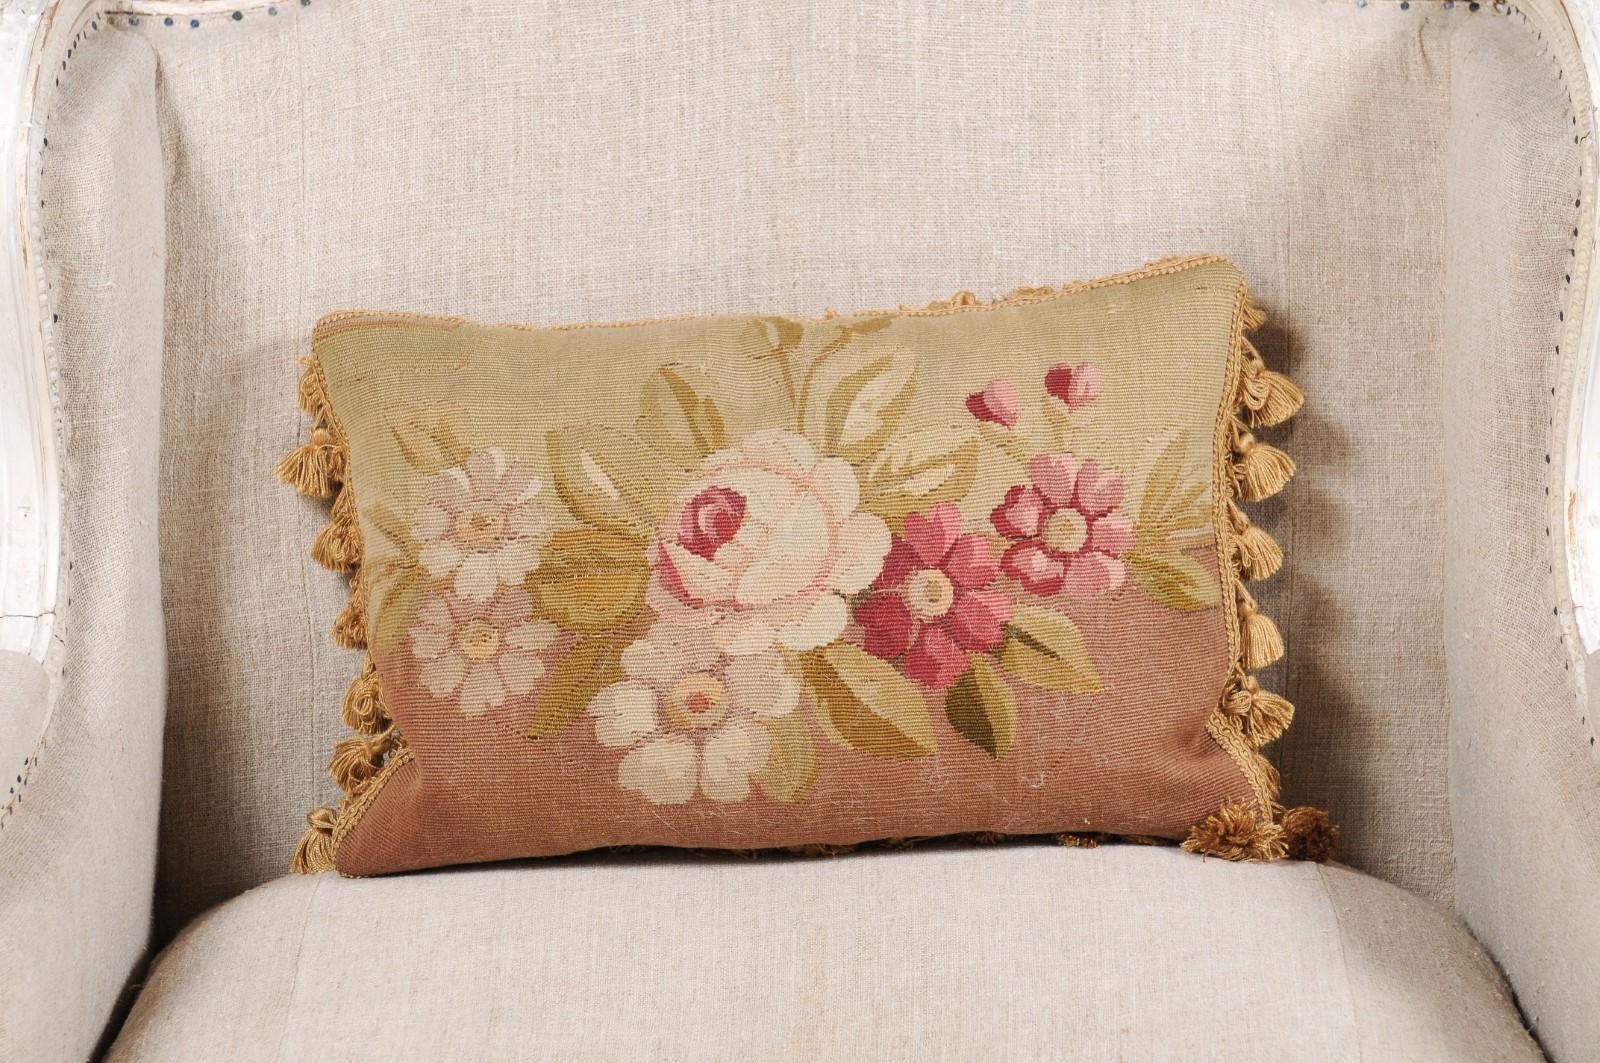 A French Aubusson tapestry pillow from the 19th century, with floral décor and tassels. Created during the 19th century in the Aubusson tapestry manufacture located in central France, this pillow features a delicate floral décor made of pink and